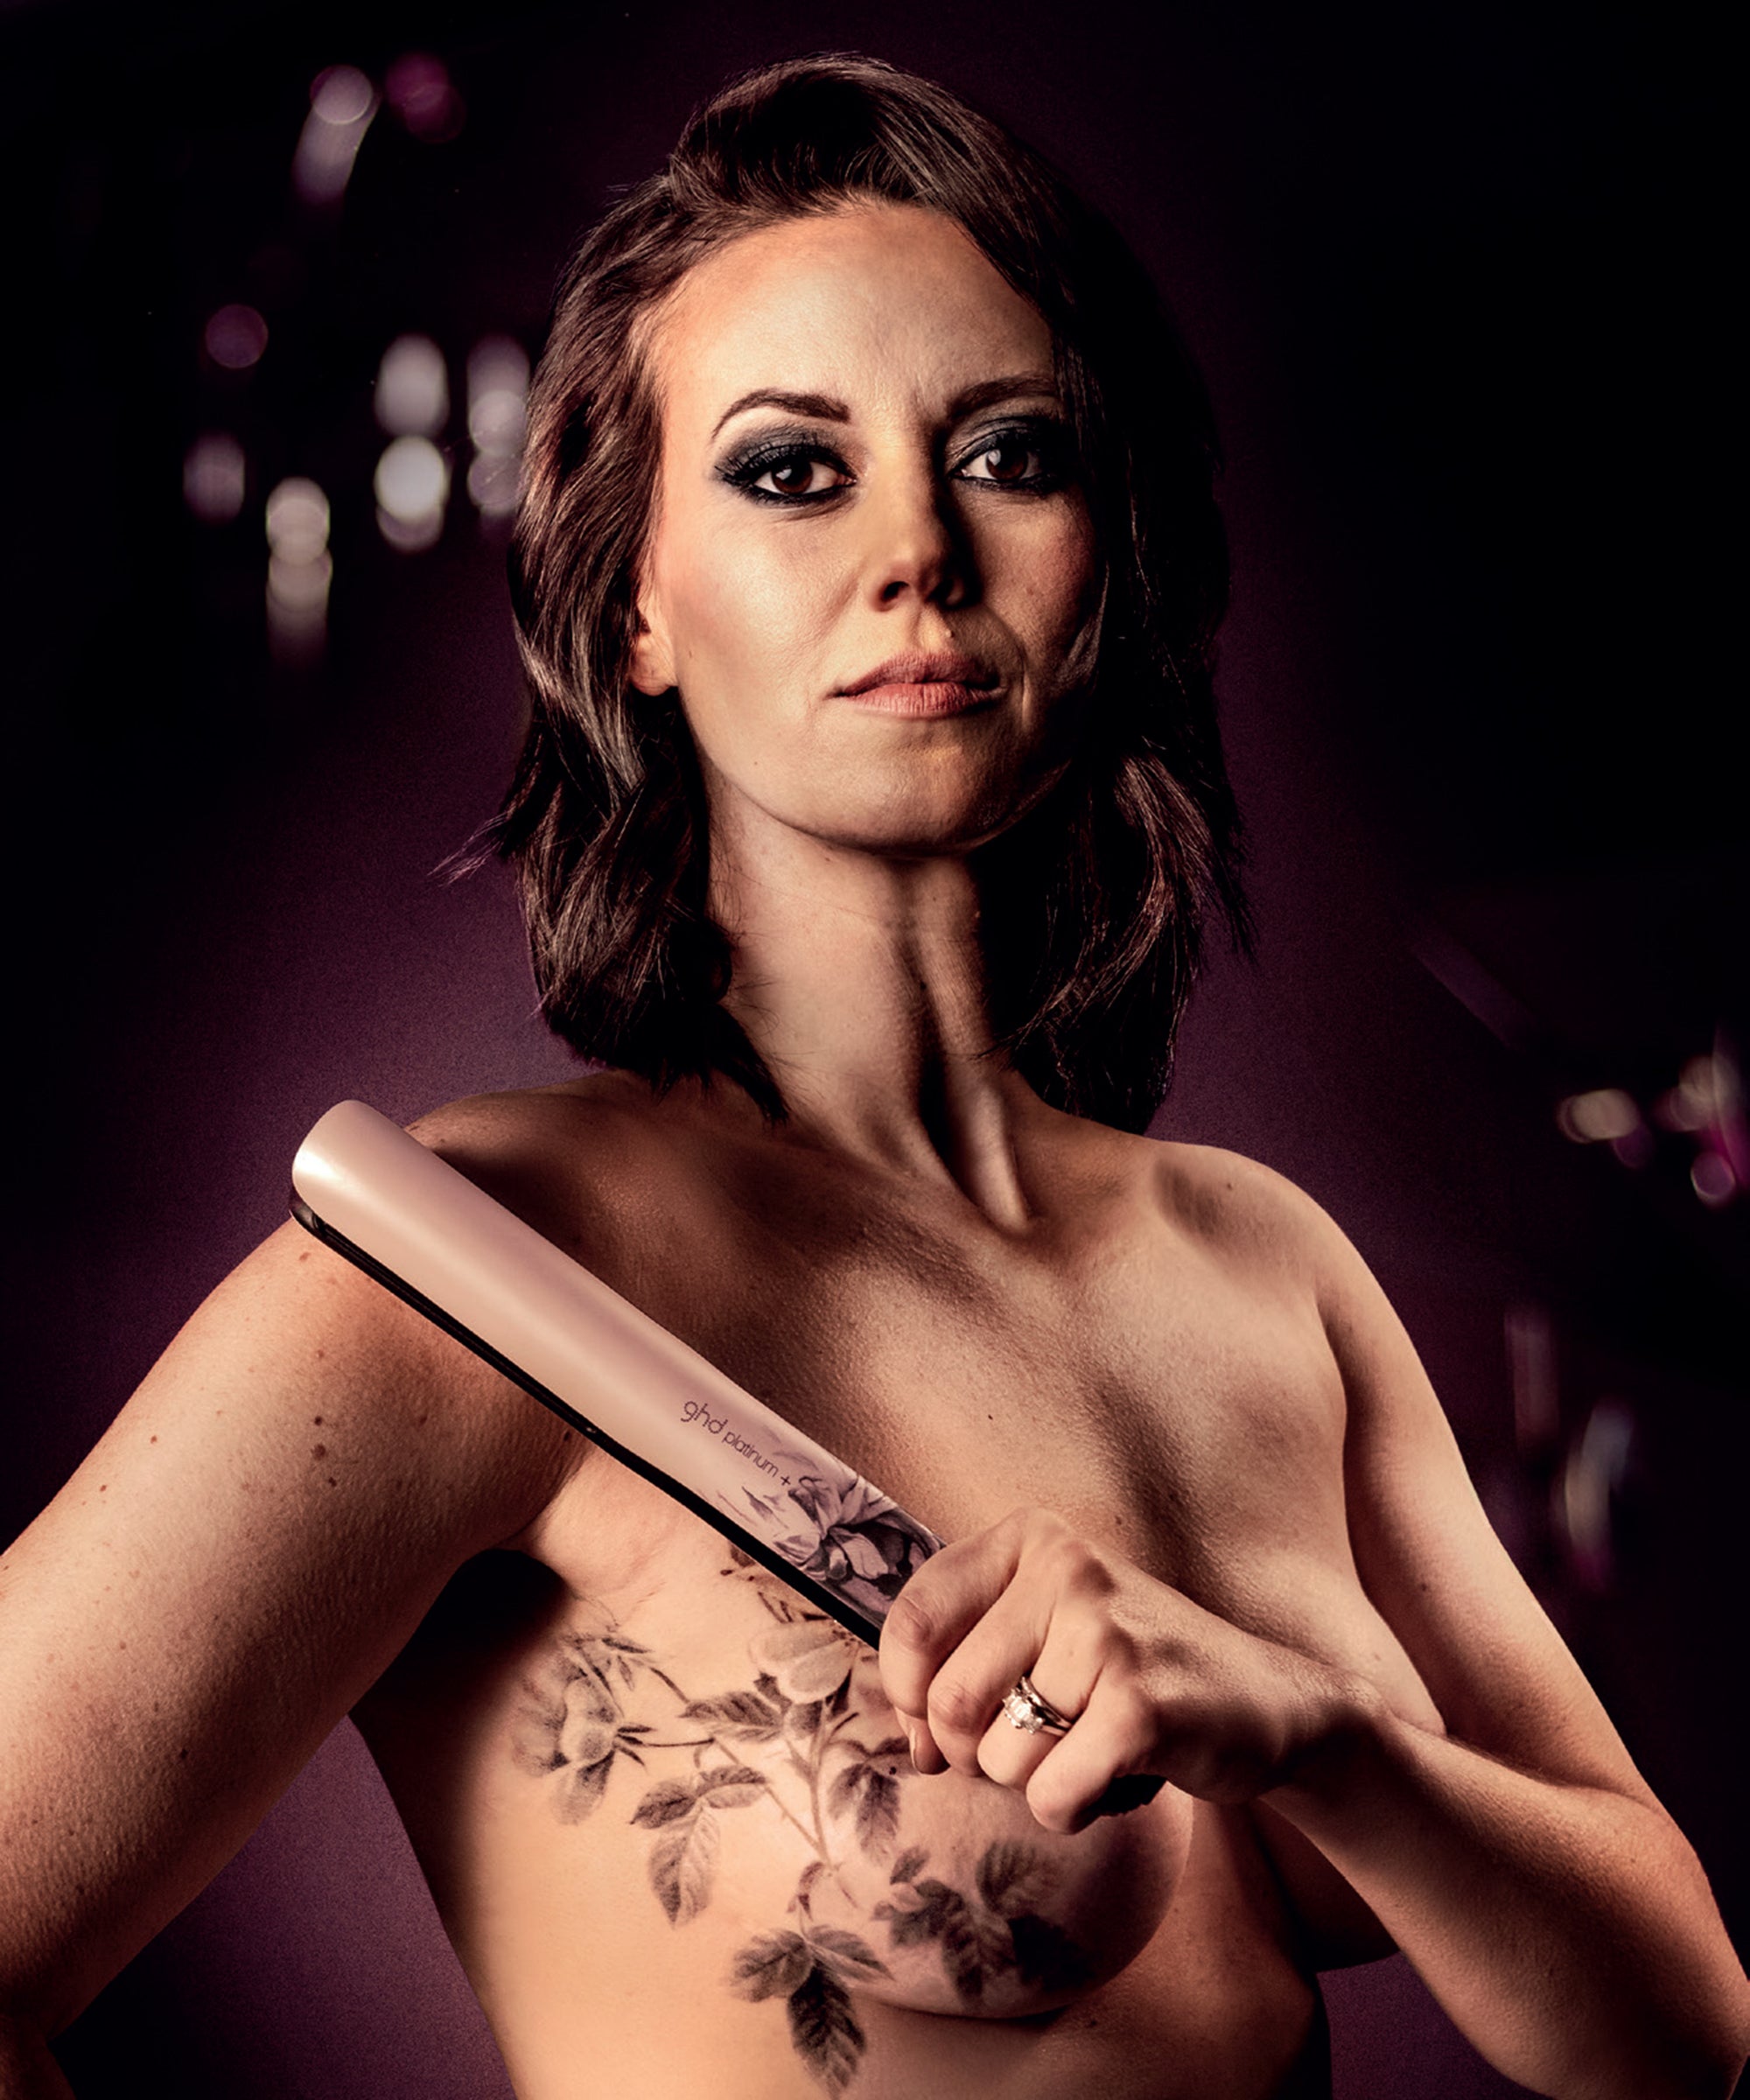 Some of the Most Amazing and Inspiring Mastectomy Tattoos Ever